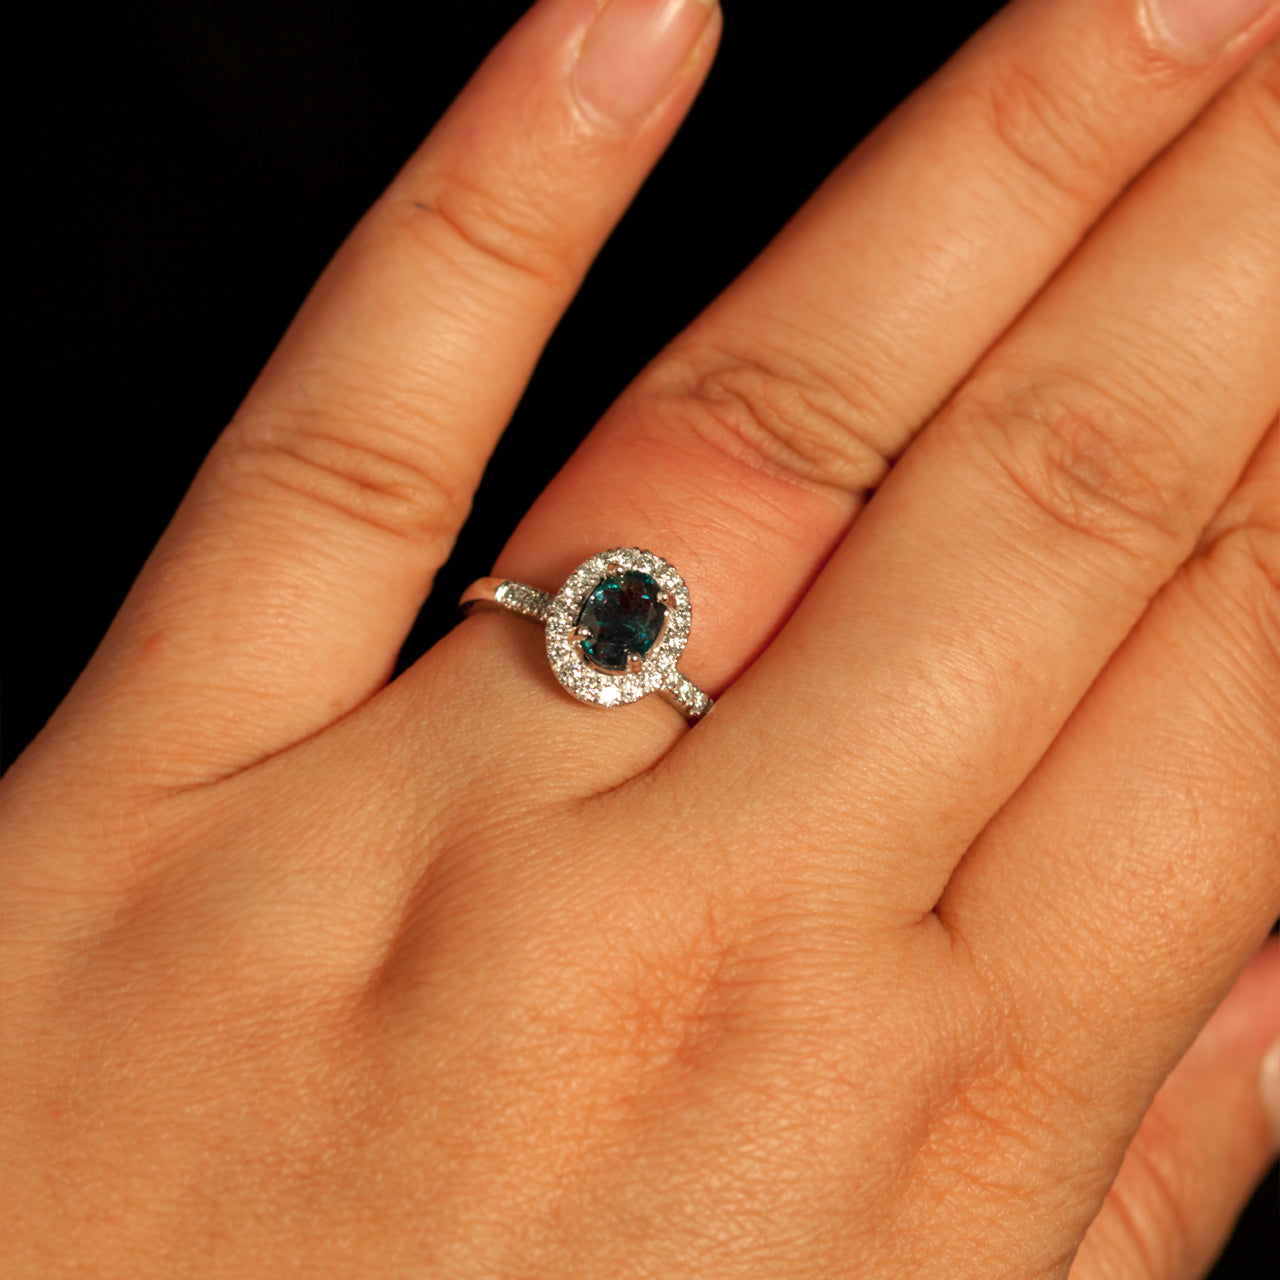 A woman's hand elegantly displaying the 0.86ct natural alexandrite and diamond ring in 18k white gold